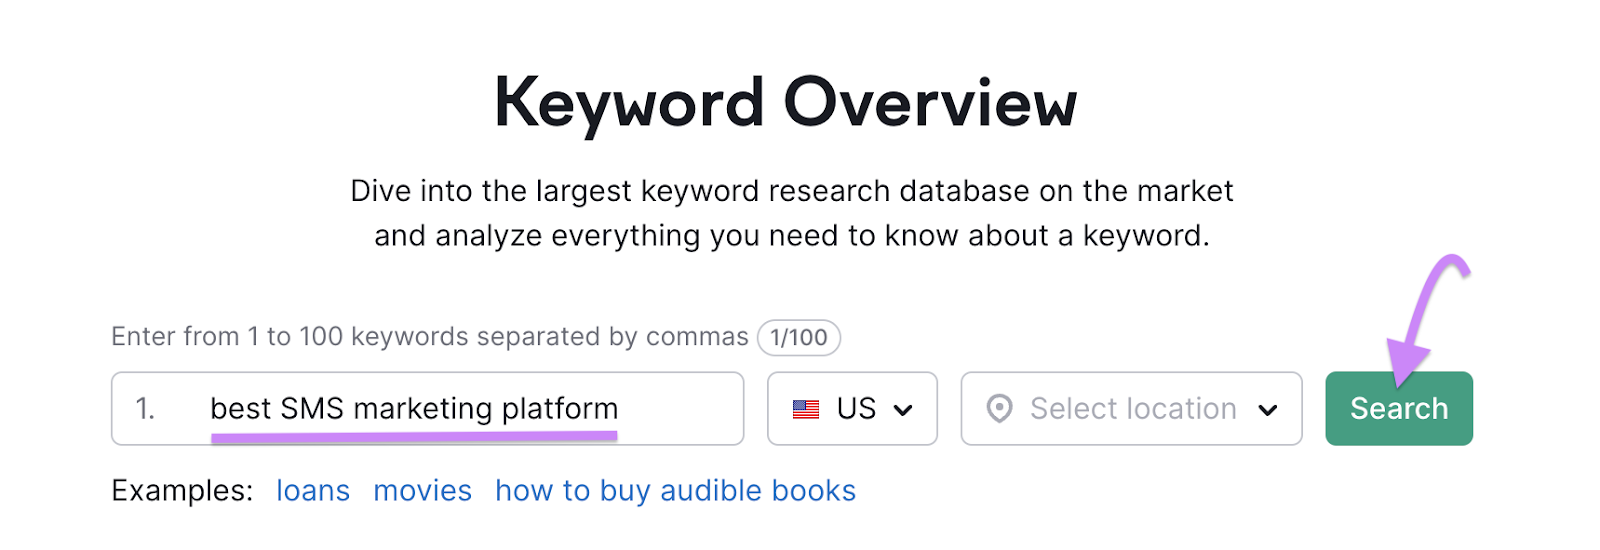 Search bar in the Keyword Overview tool.